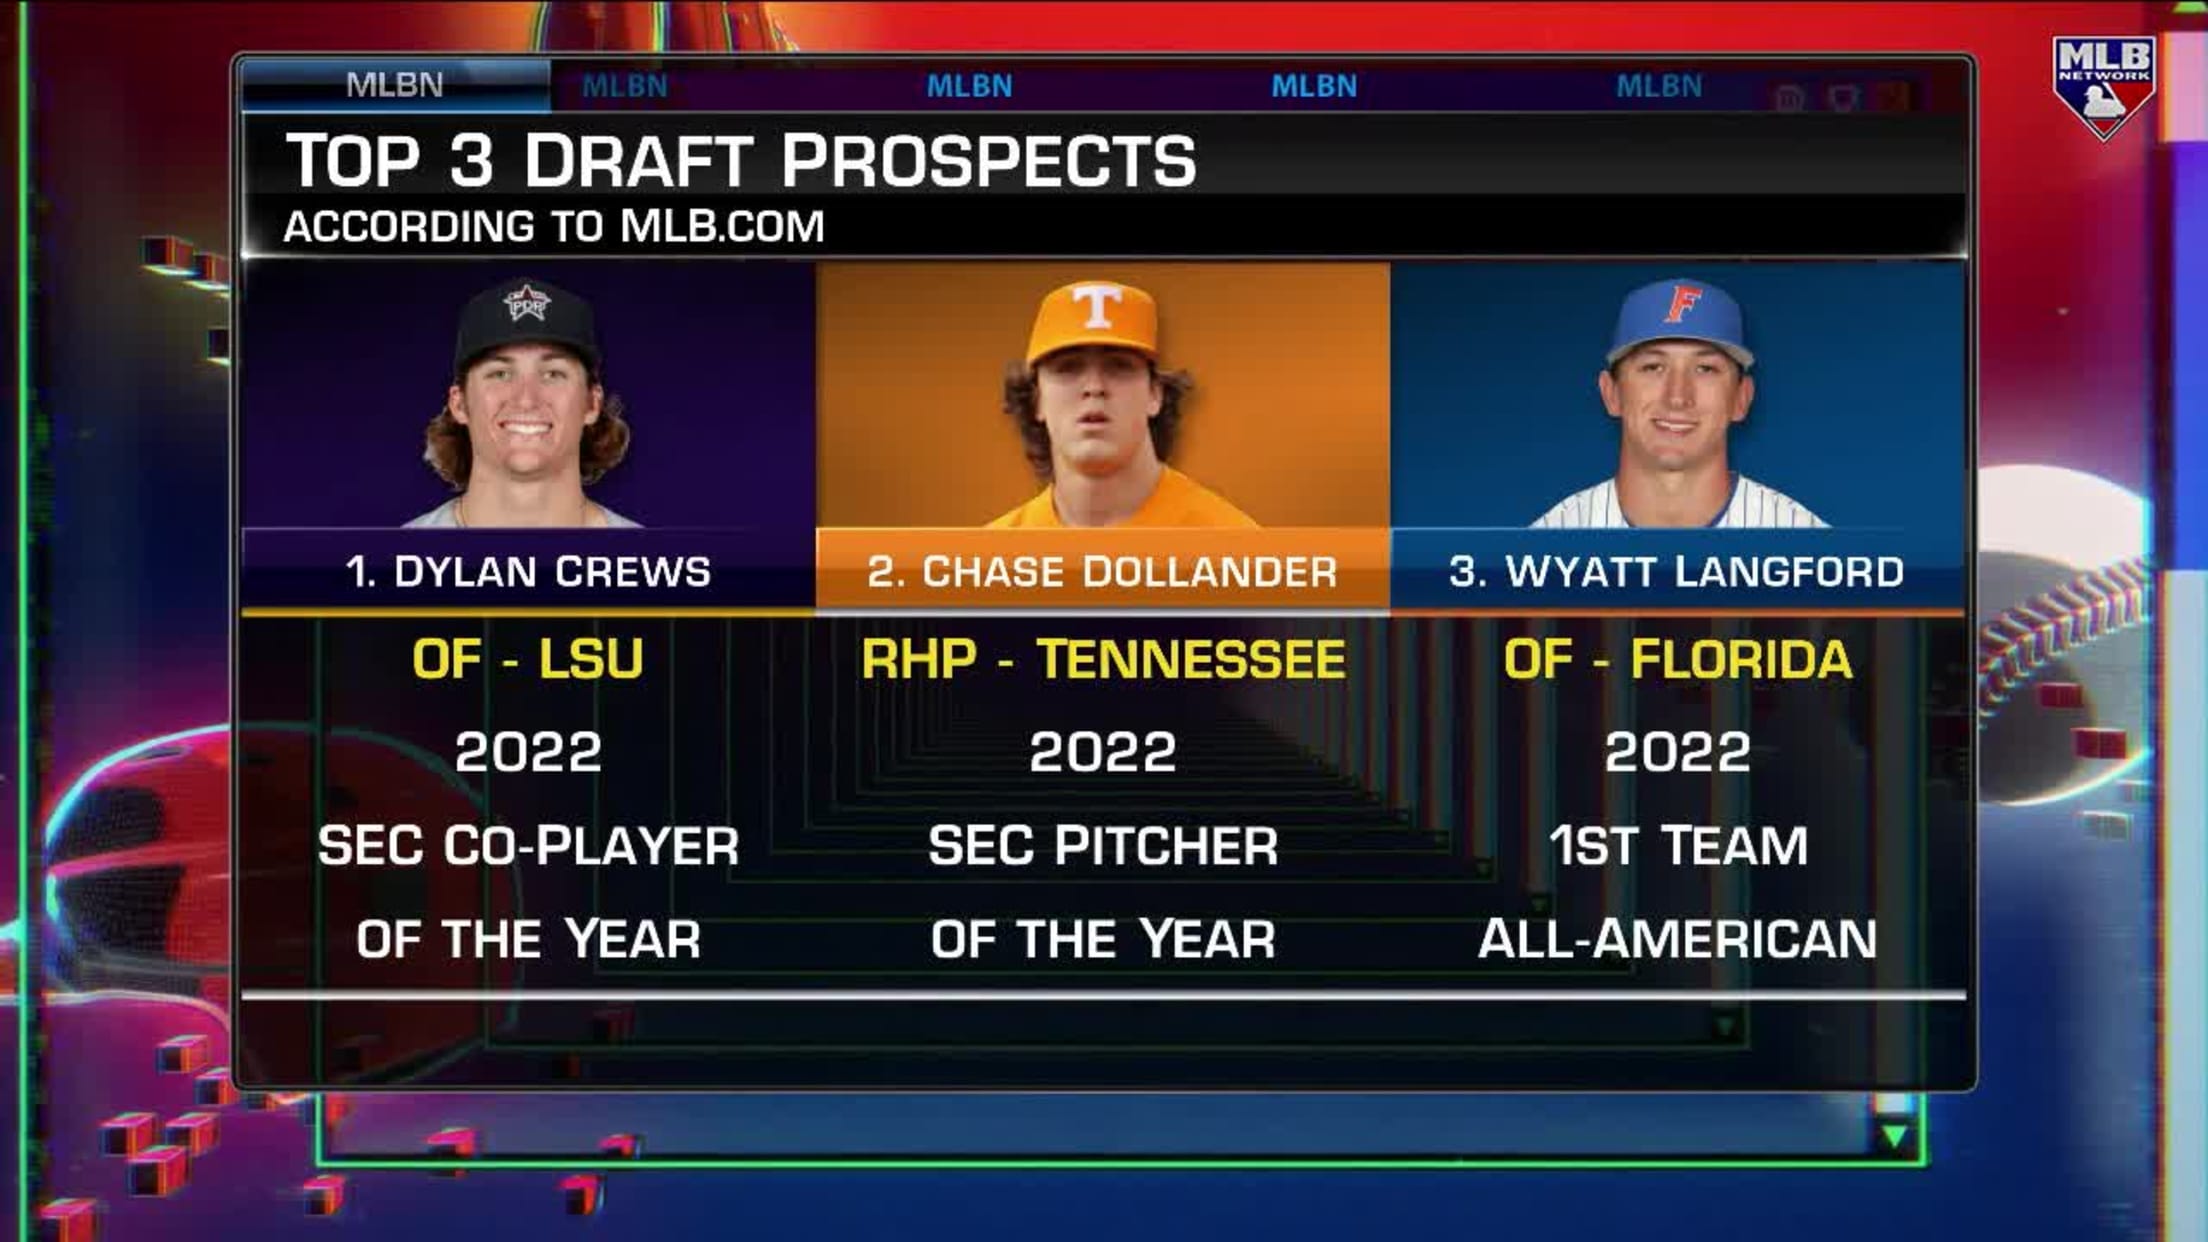 Mayo on top Draft prospects